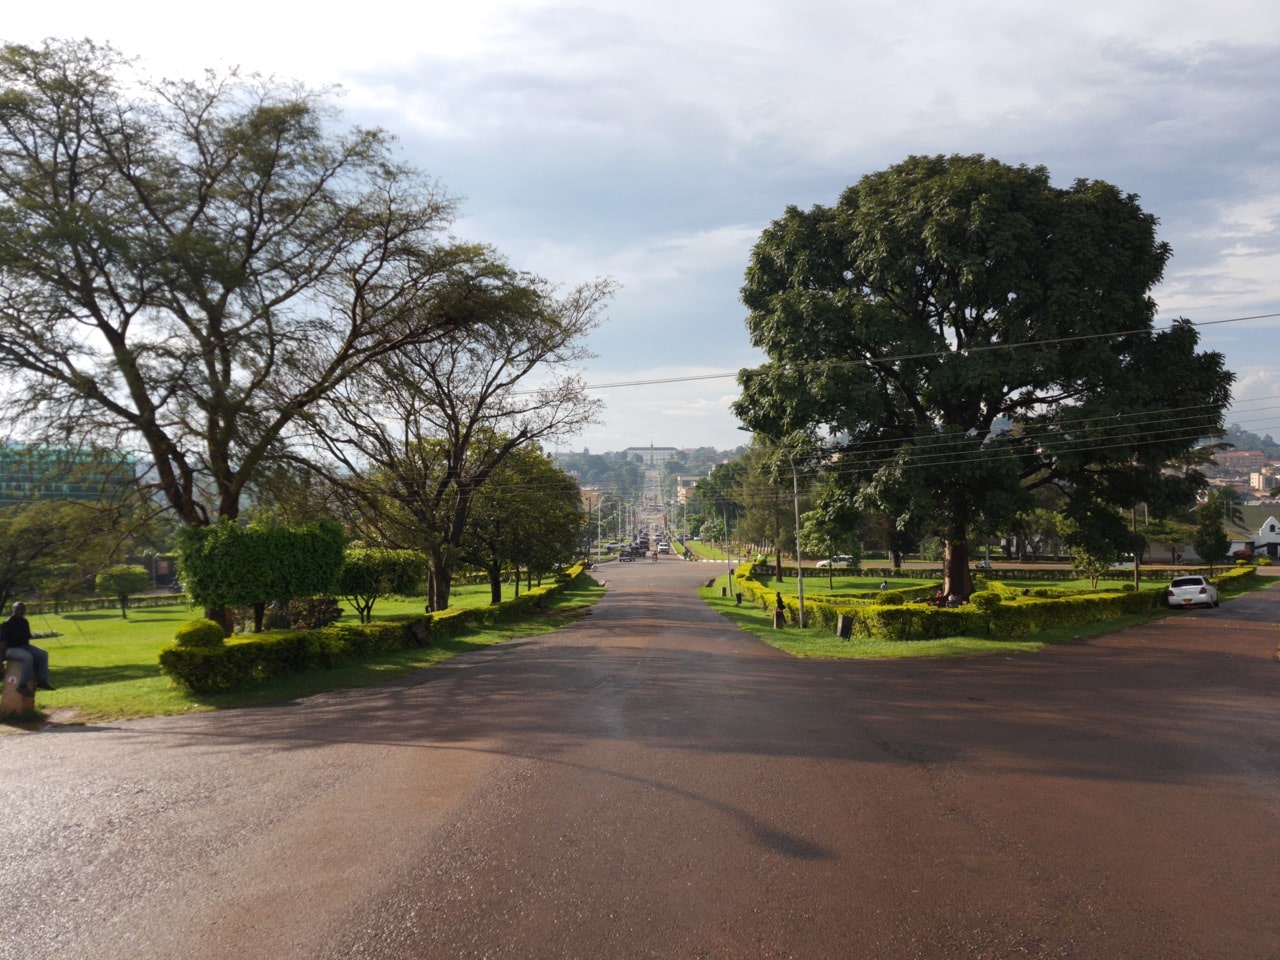 View to the Palace to the Parliament of the Kingdom of Bundaga, in Uganda, 25 October 2017, ilf_/Flickr, Attribution-ShareAlike 2.0 Generic (CC BY-SA 2.0)